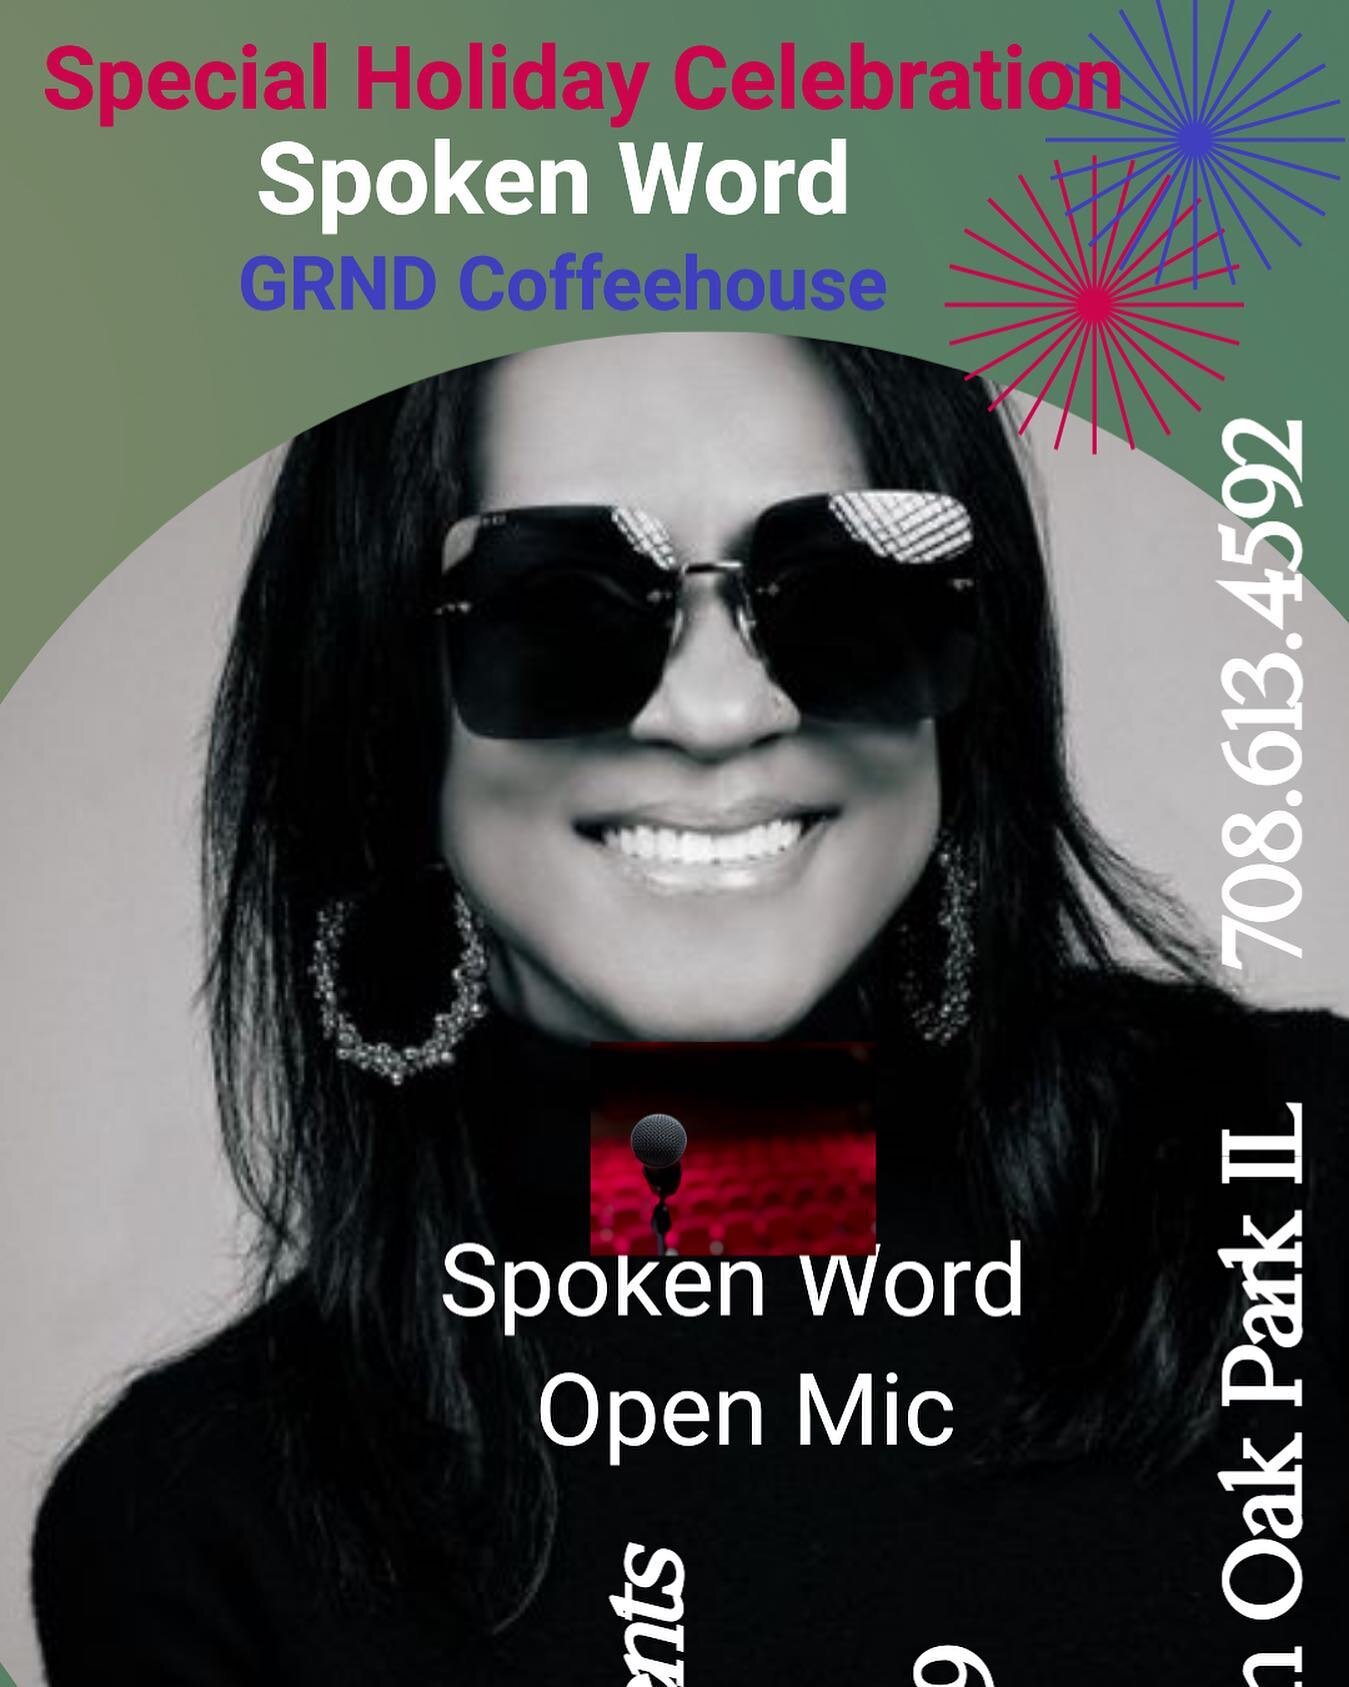 Join us on December 9th at GRND Coffee House for an exciting evening of spoken word and open mic.

Don't miss out on this fun and uplifting evening! 

Tickets are $10 each and must be purchased in person at the store or in advanced online at https://